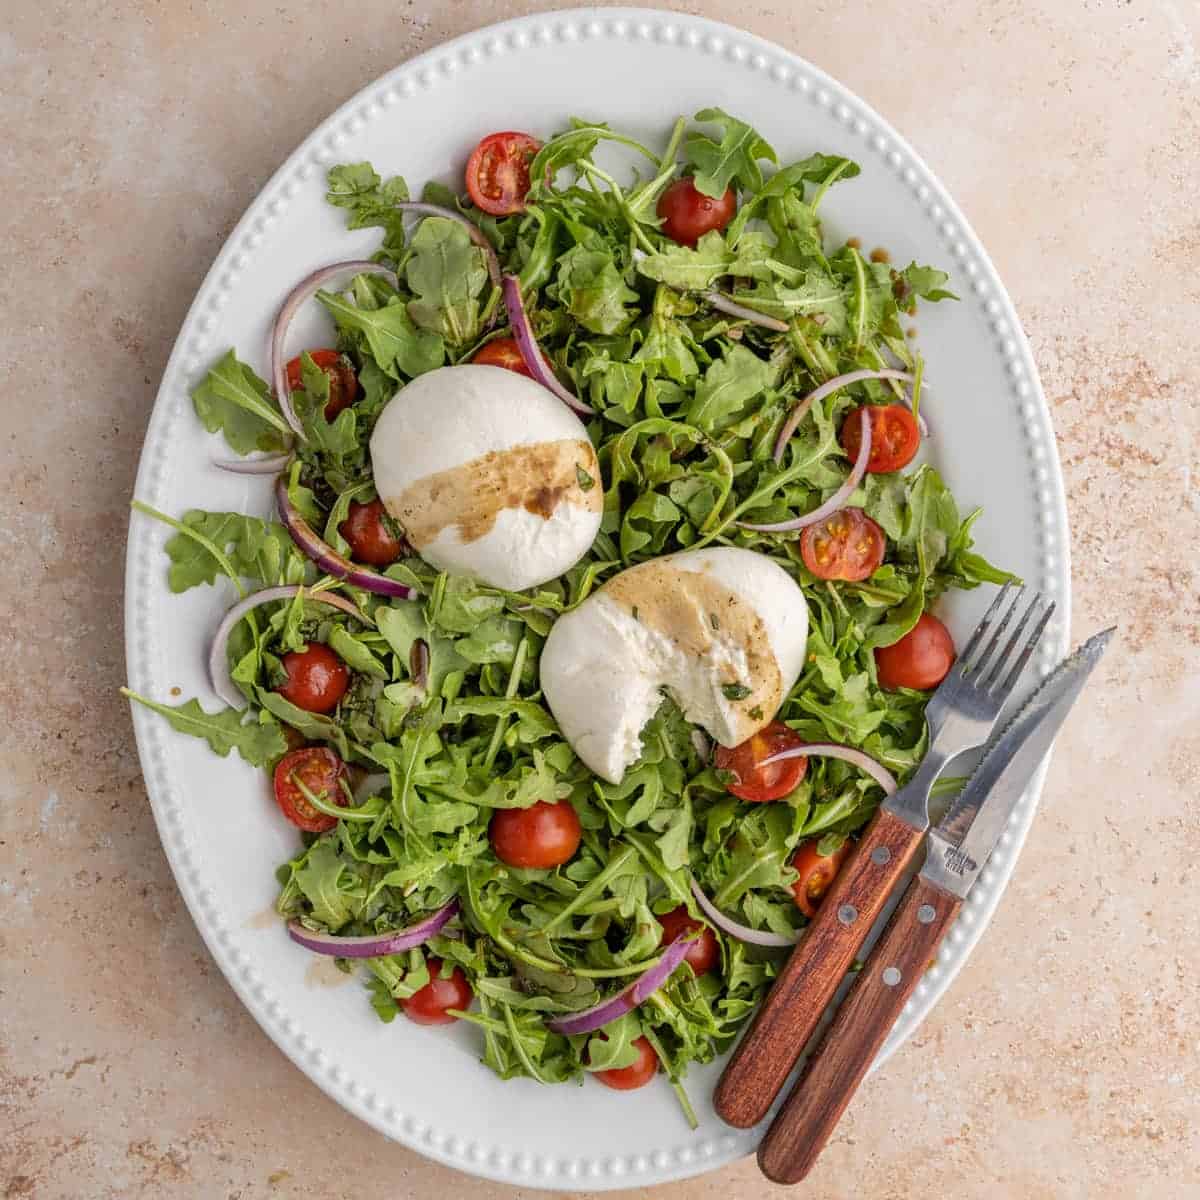 Large serving platter of arugula burrata salad with halved cherry tomatoes and red onion slices, drizzled with basil balsamic. 